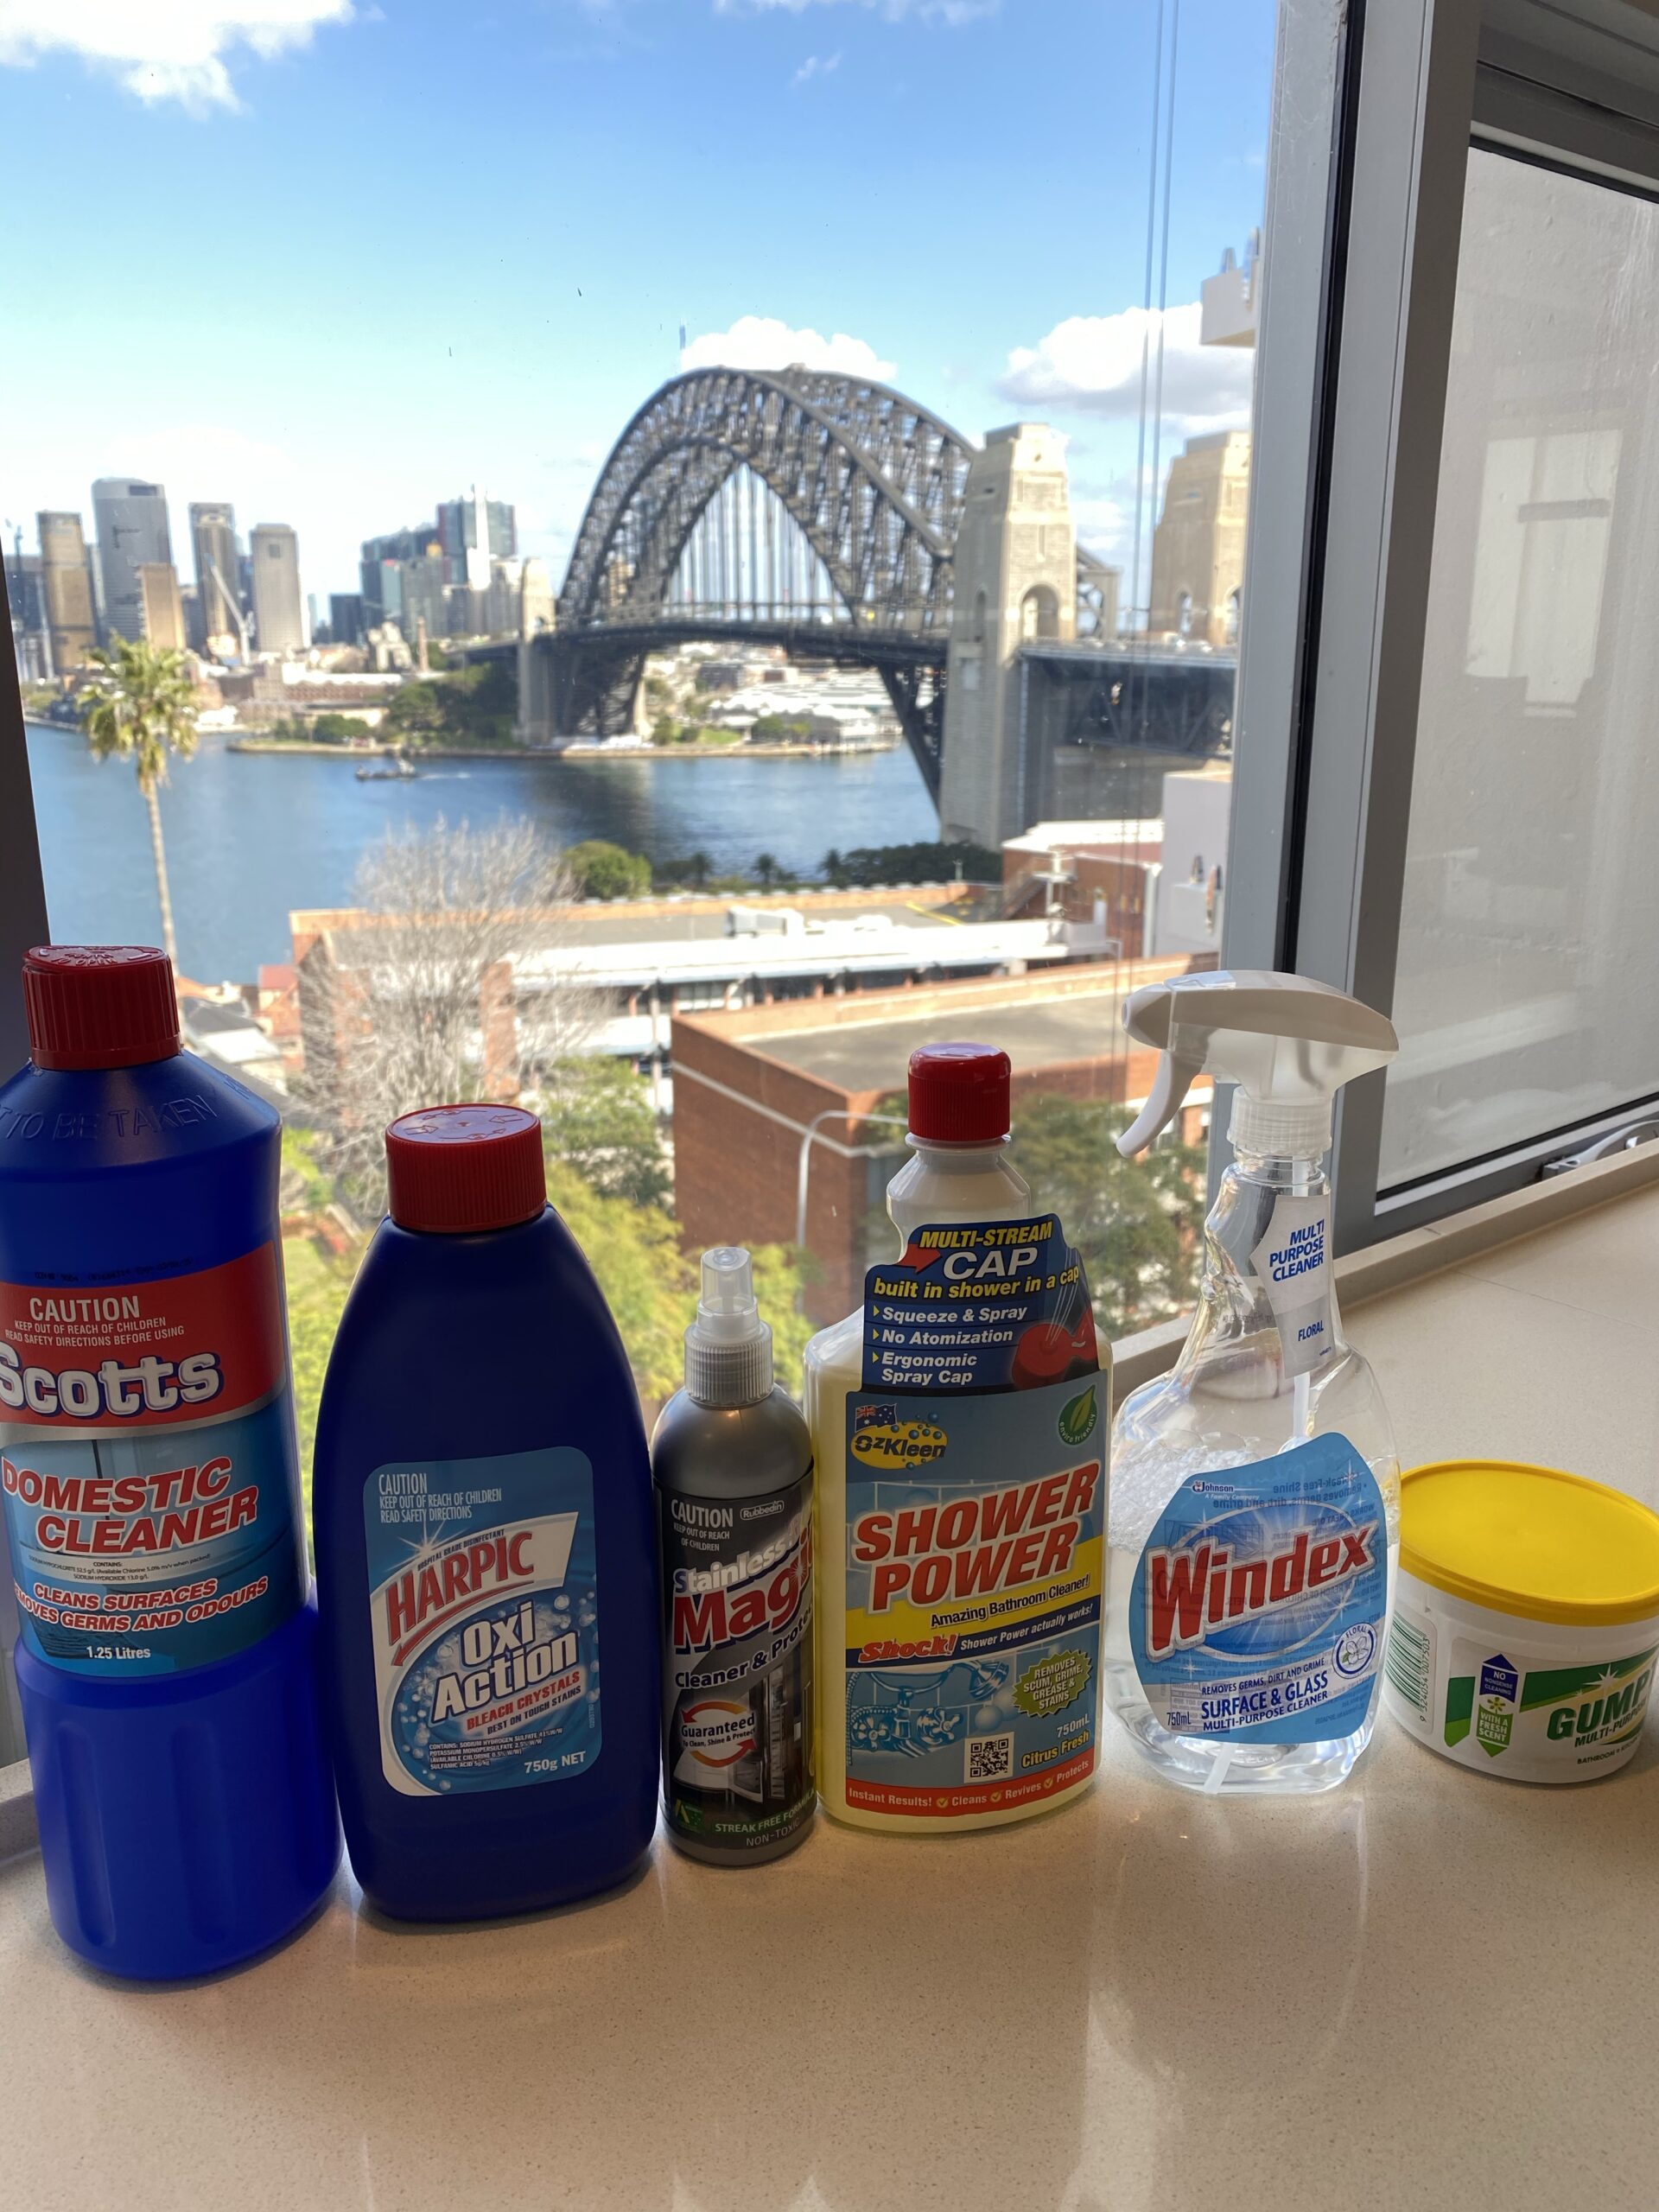 Switching to non-toxic home cleaning products